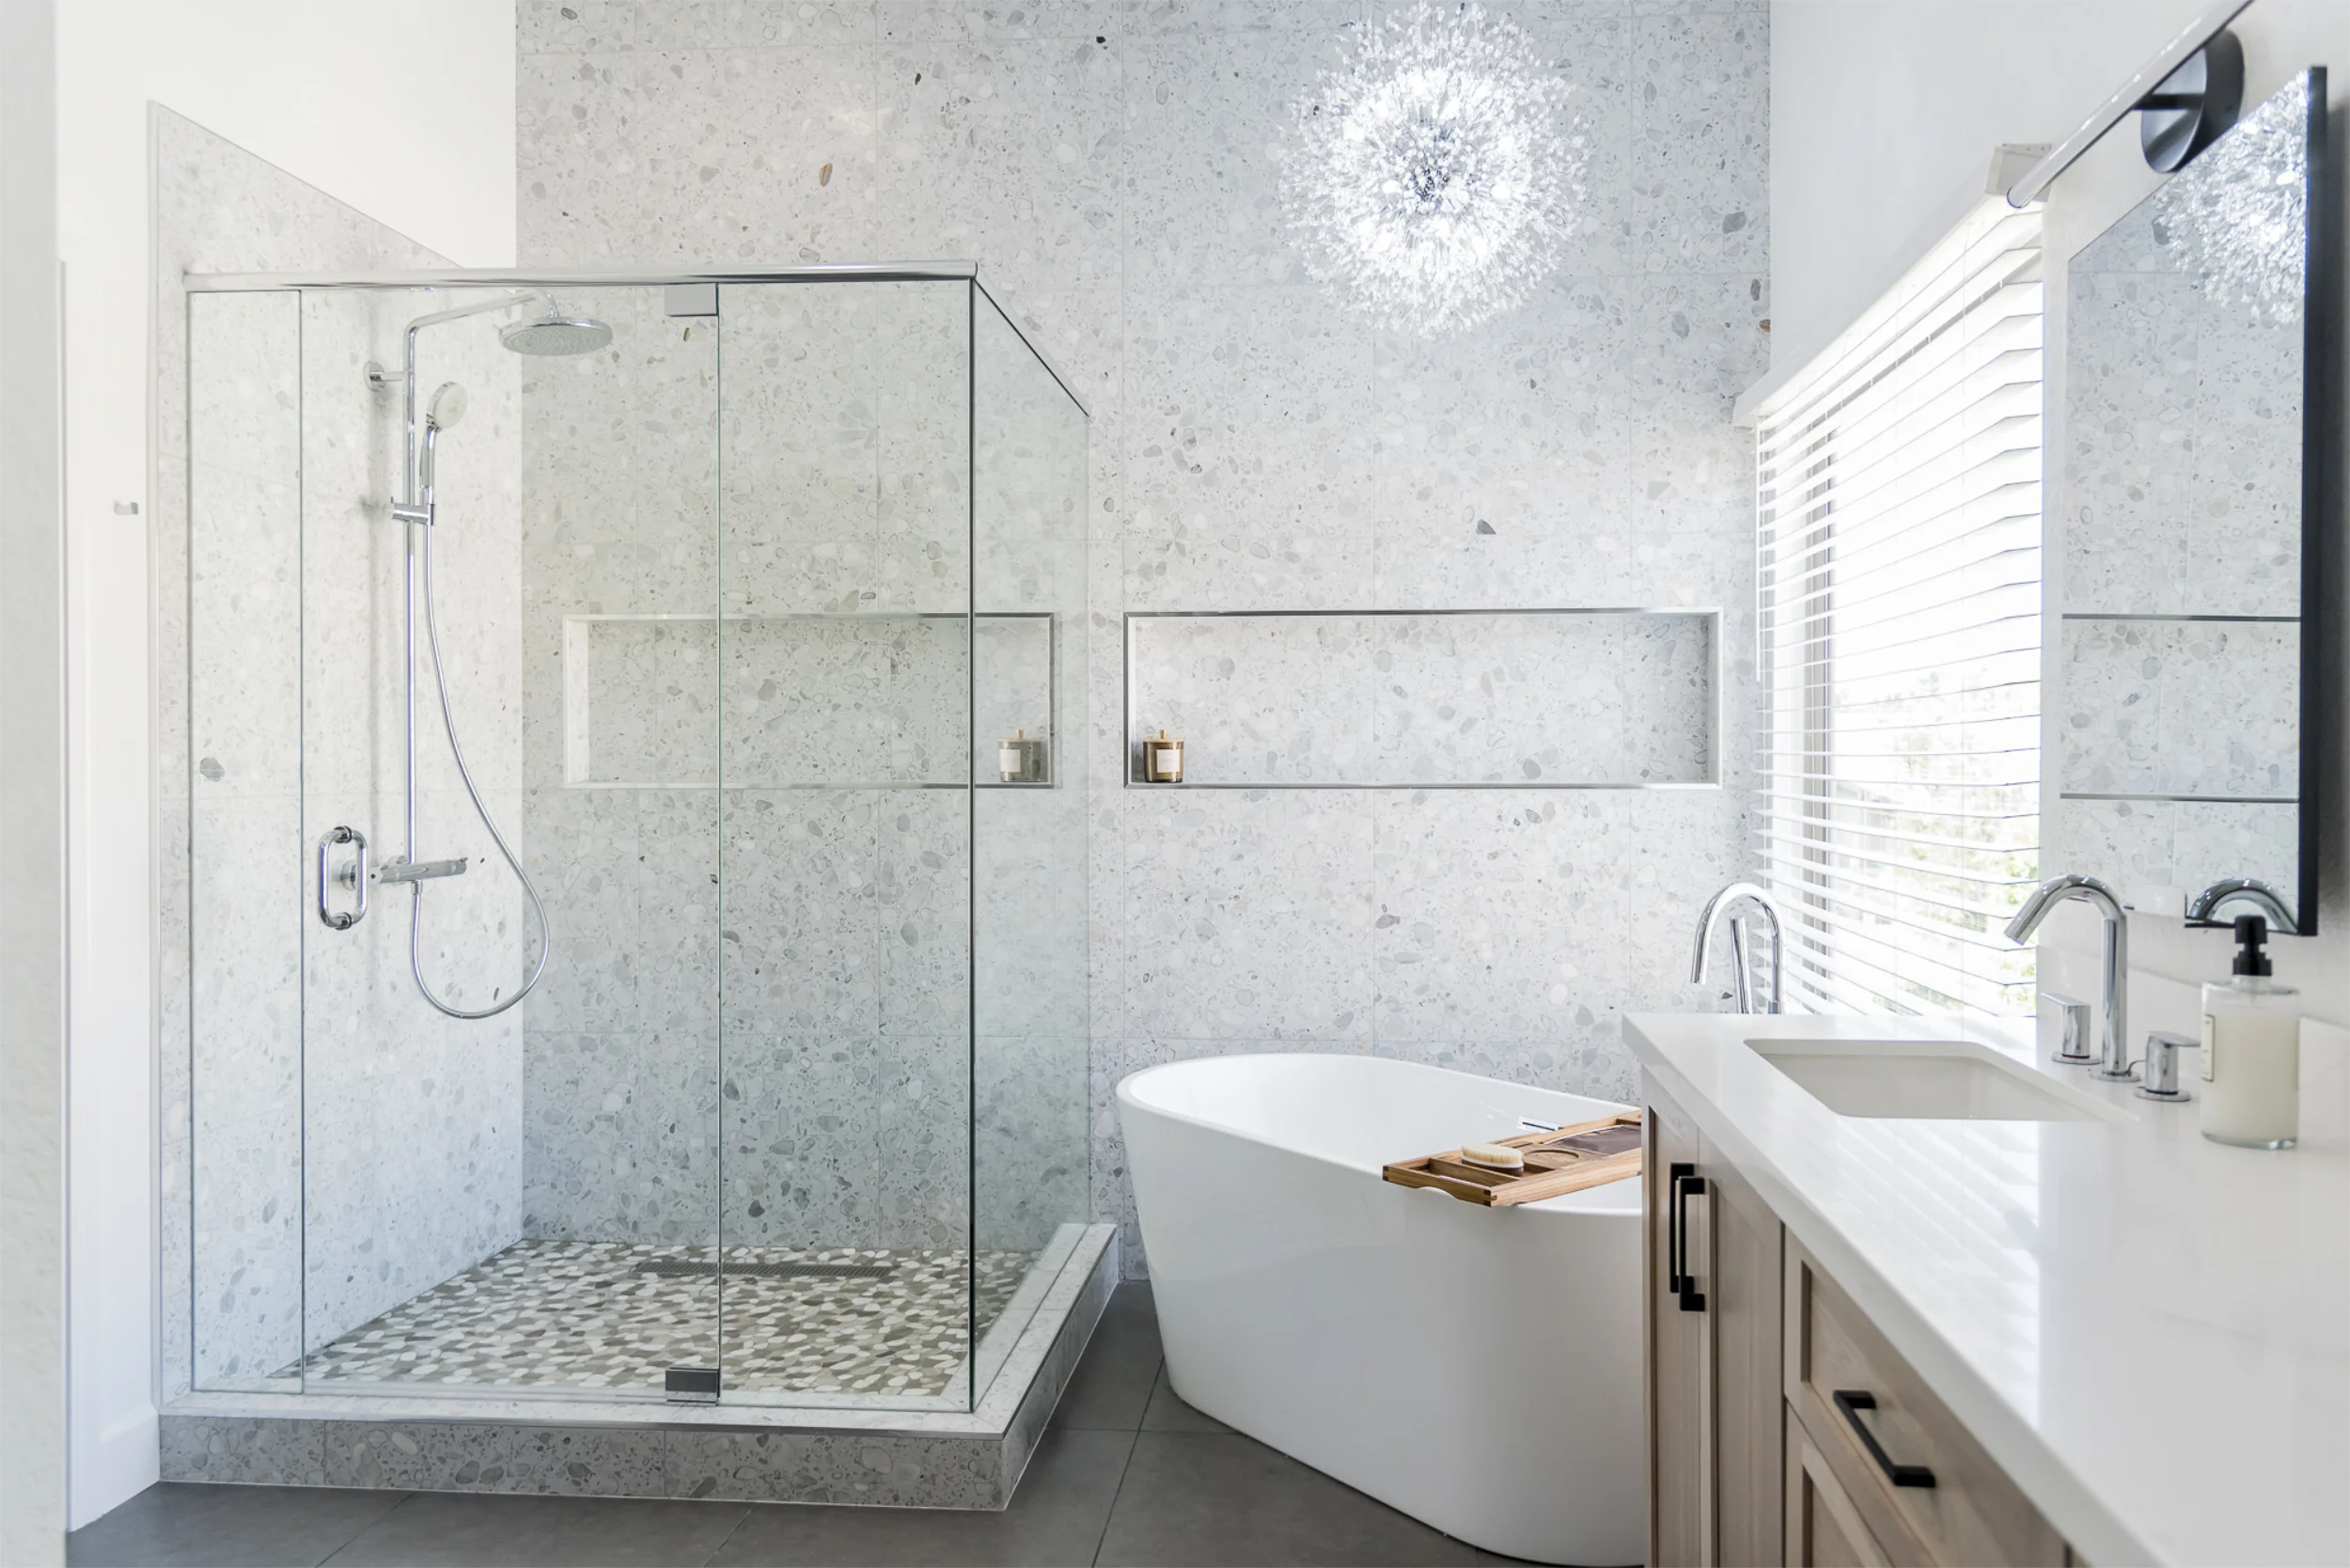 Shower and freestanding tub